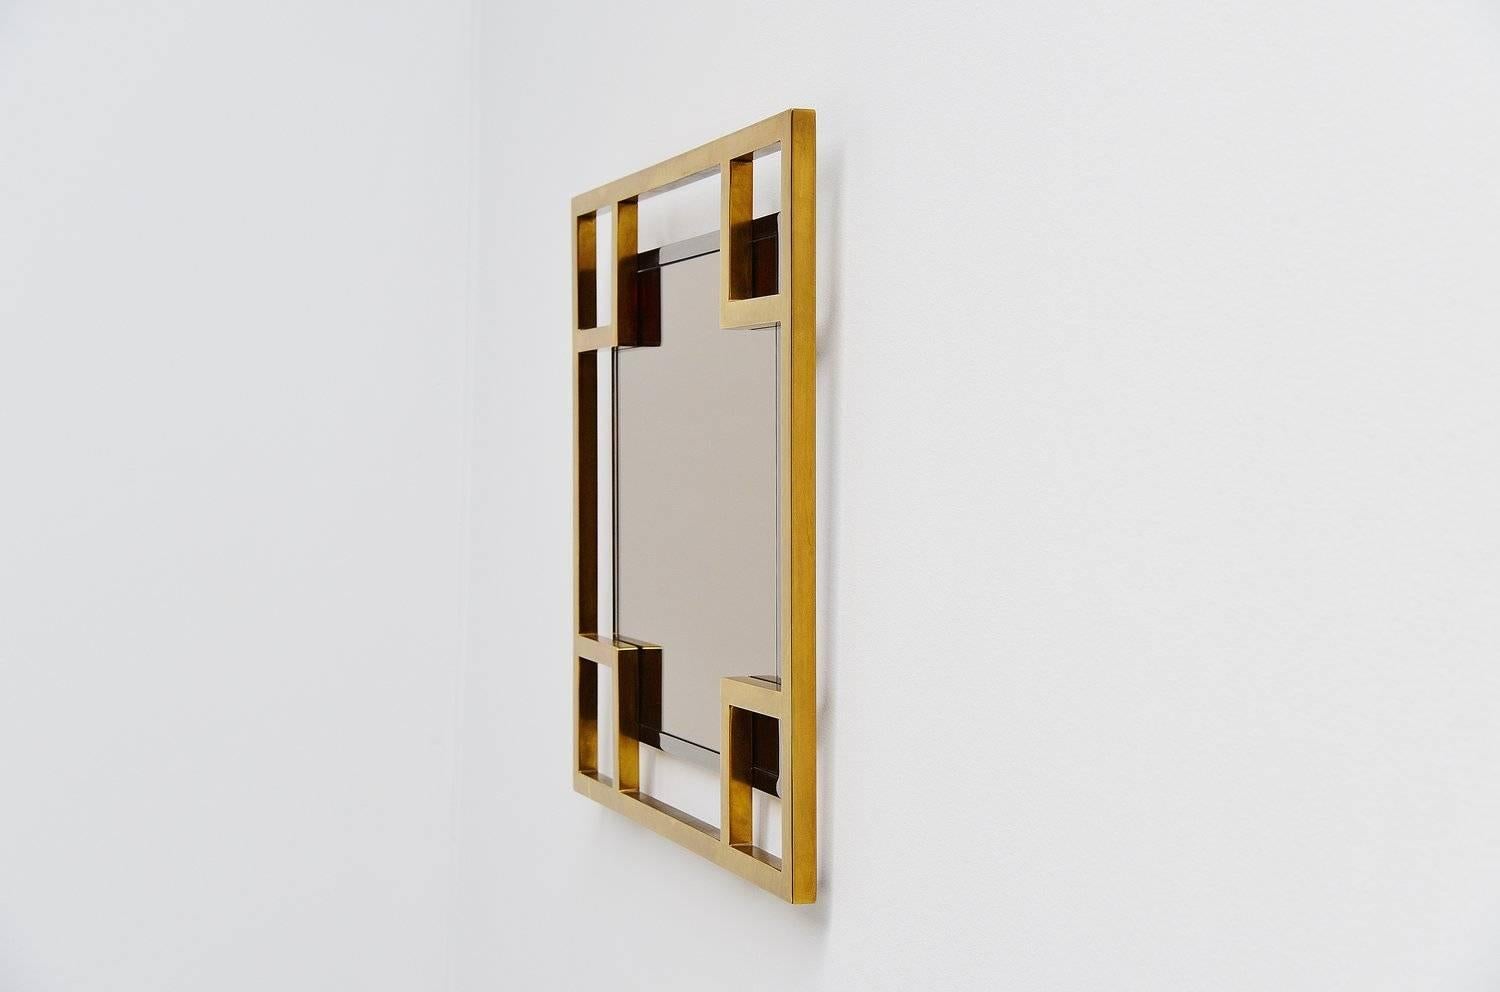 Excellent wall mirror by Maison Jansen, France, 1970. This high quality wall mirror was made of brass and chrome details and has a fume glass mirror. Heavy quality mirror and very nicely made. Easy to wall hang using only one screw. Can be used in